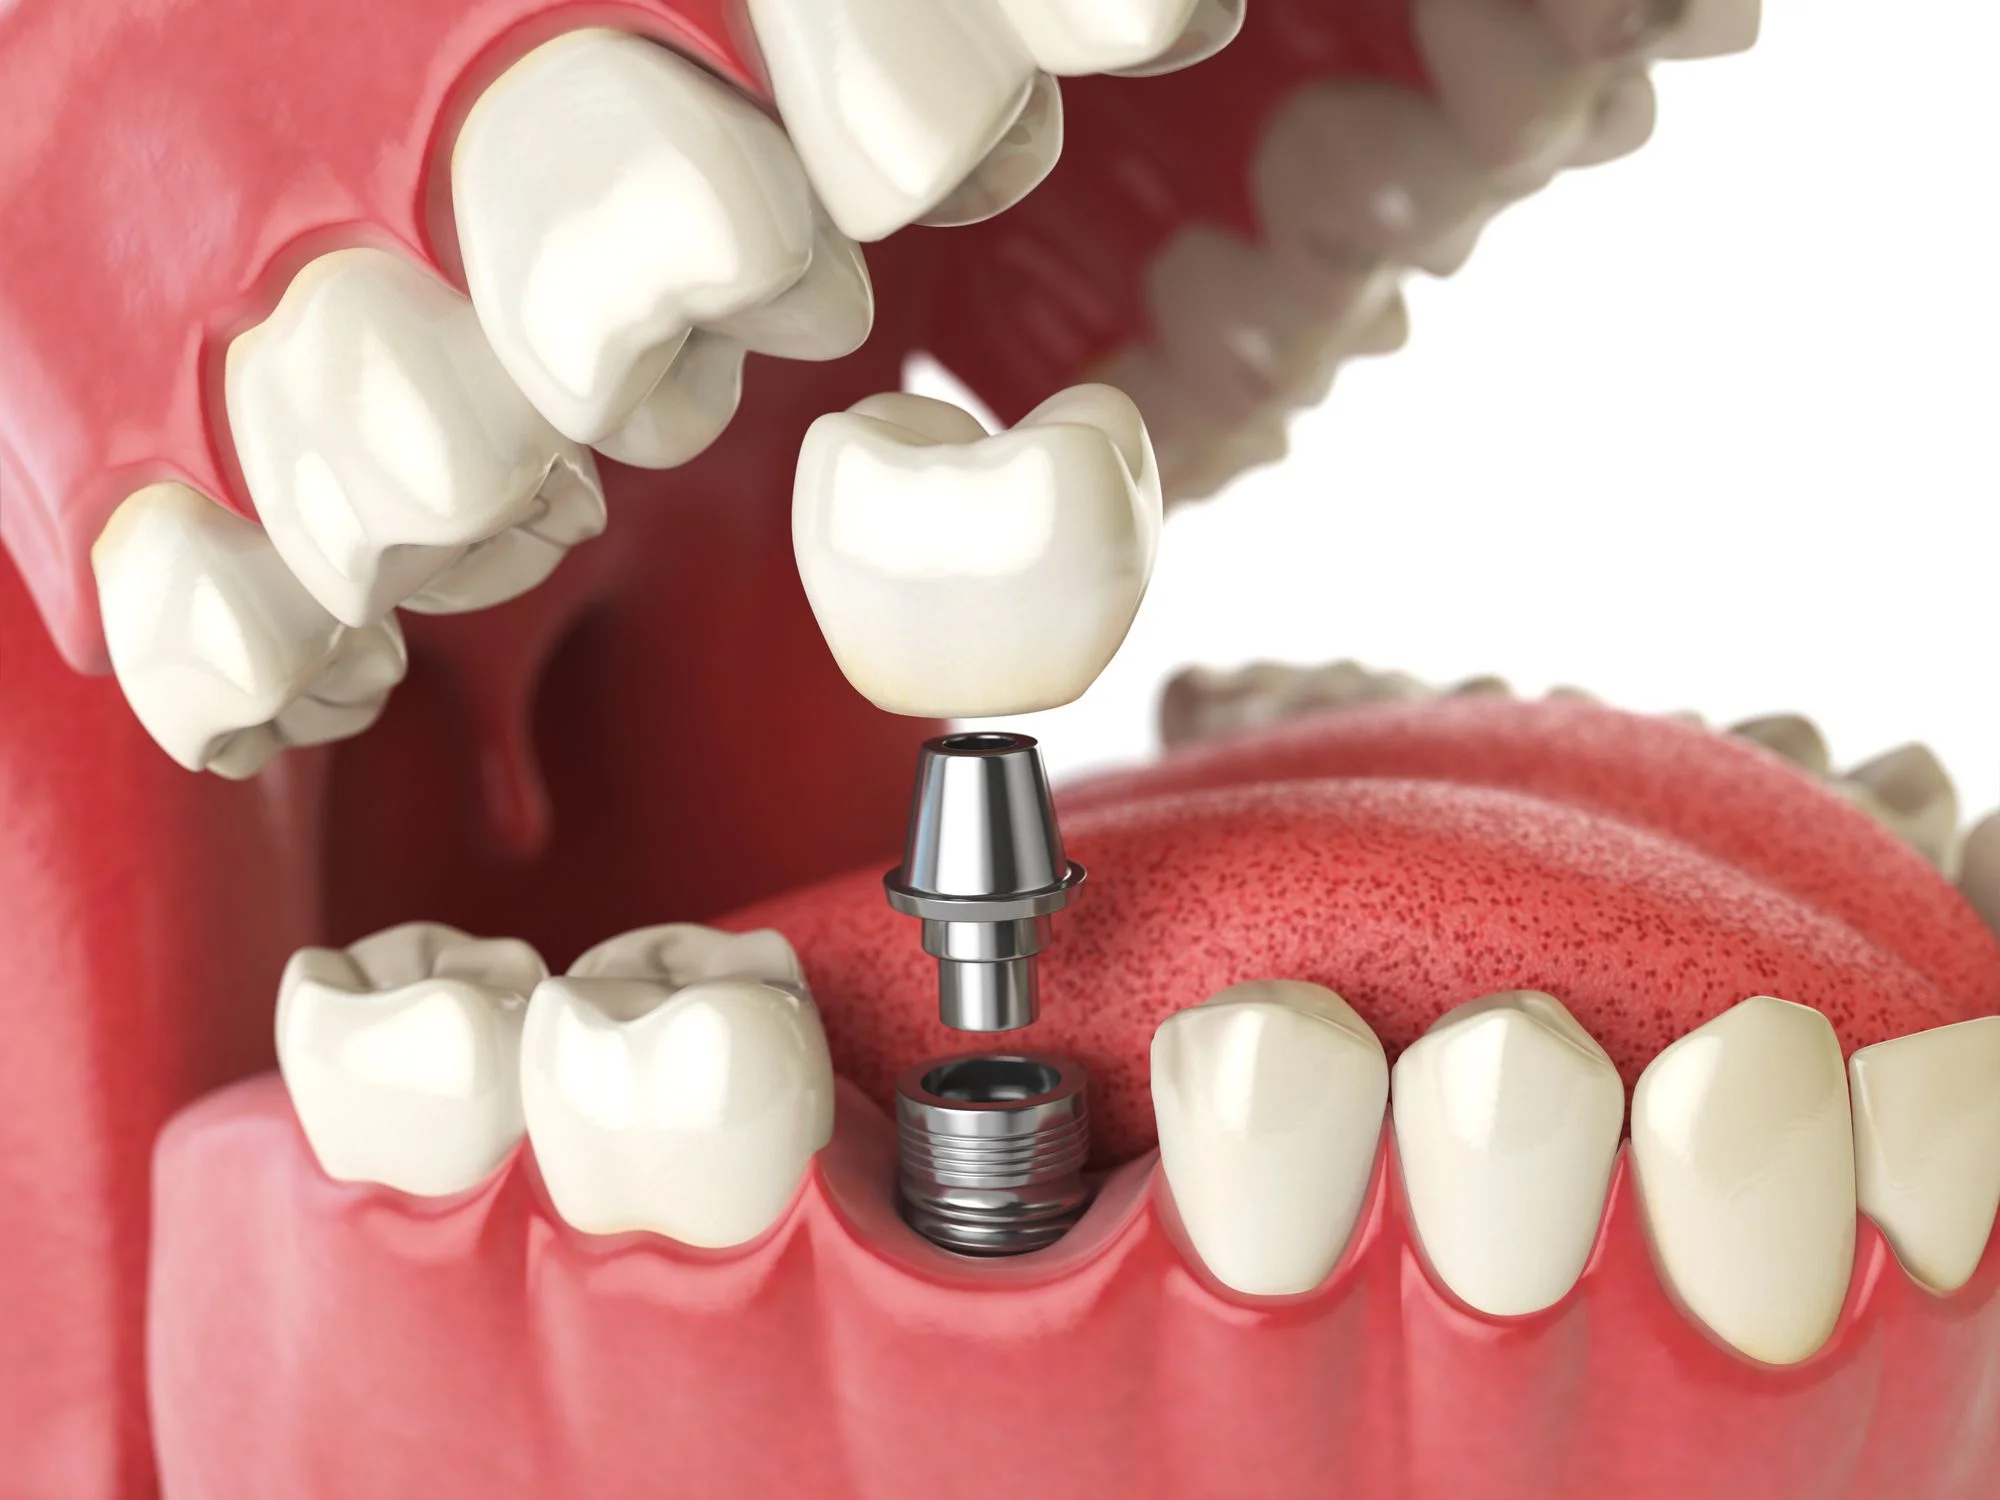 What Are the Key Benefits of Dental Implants?